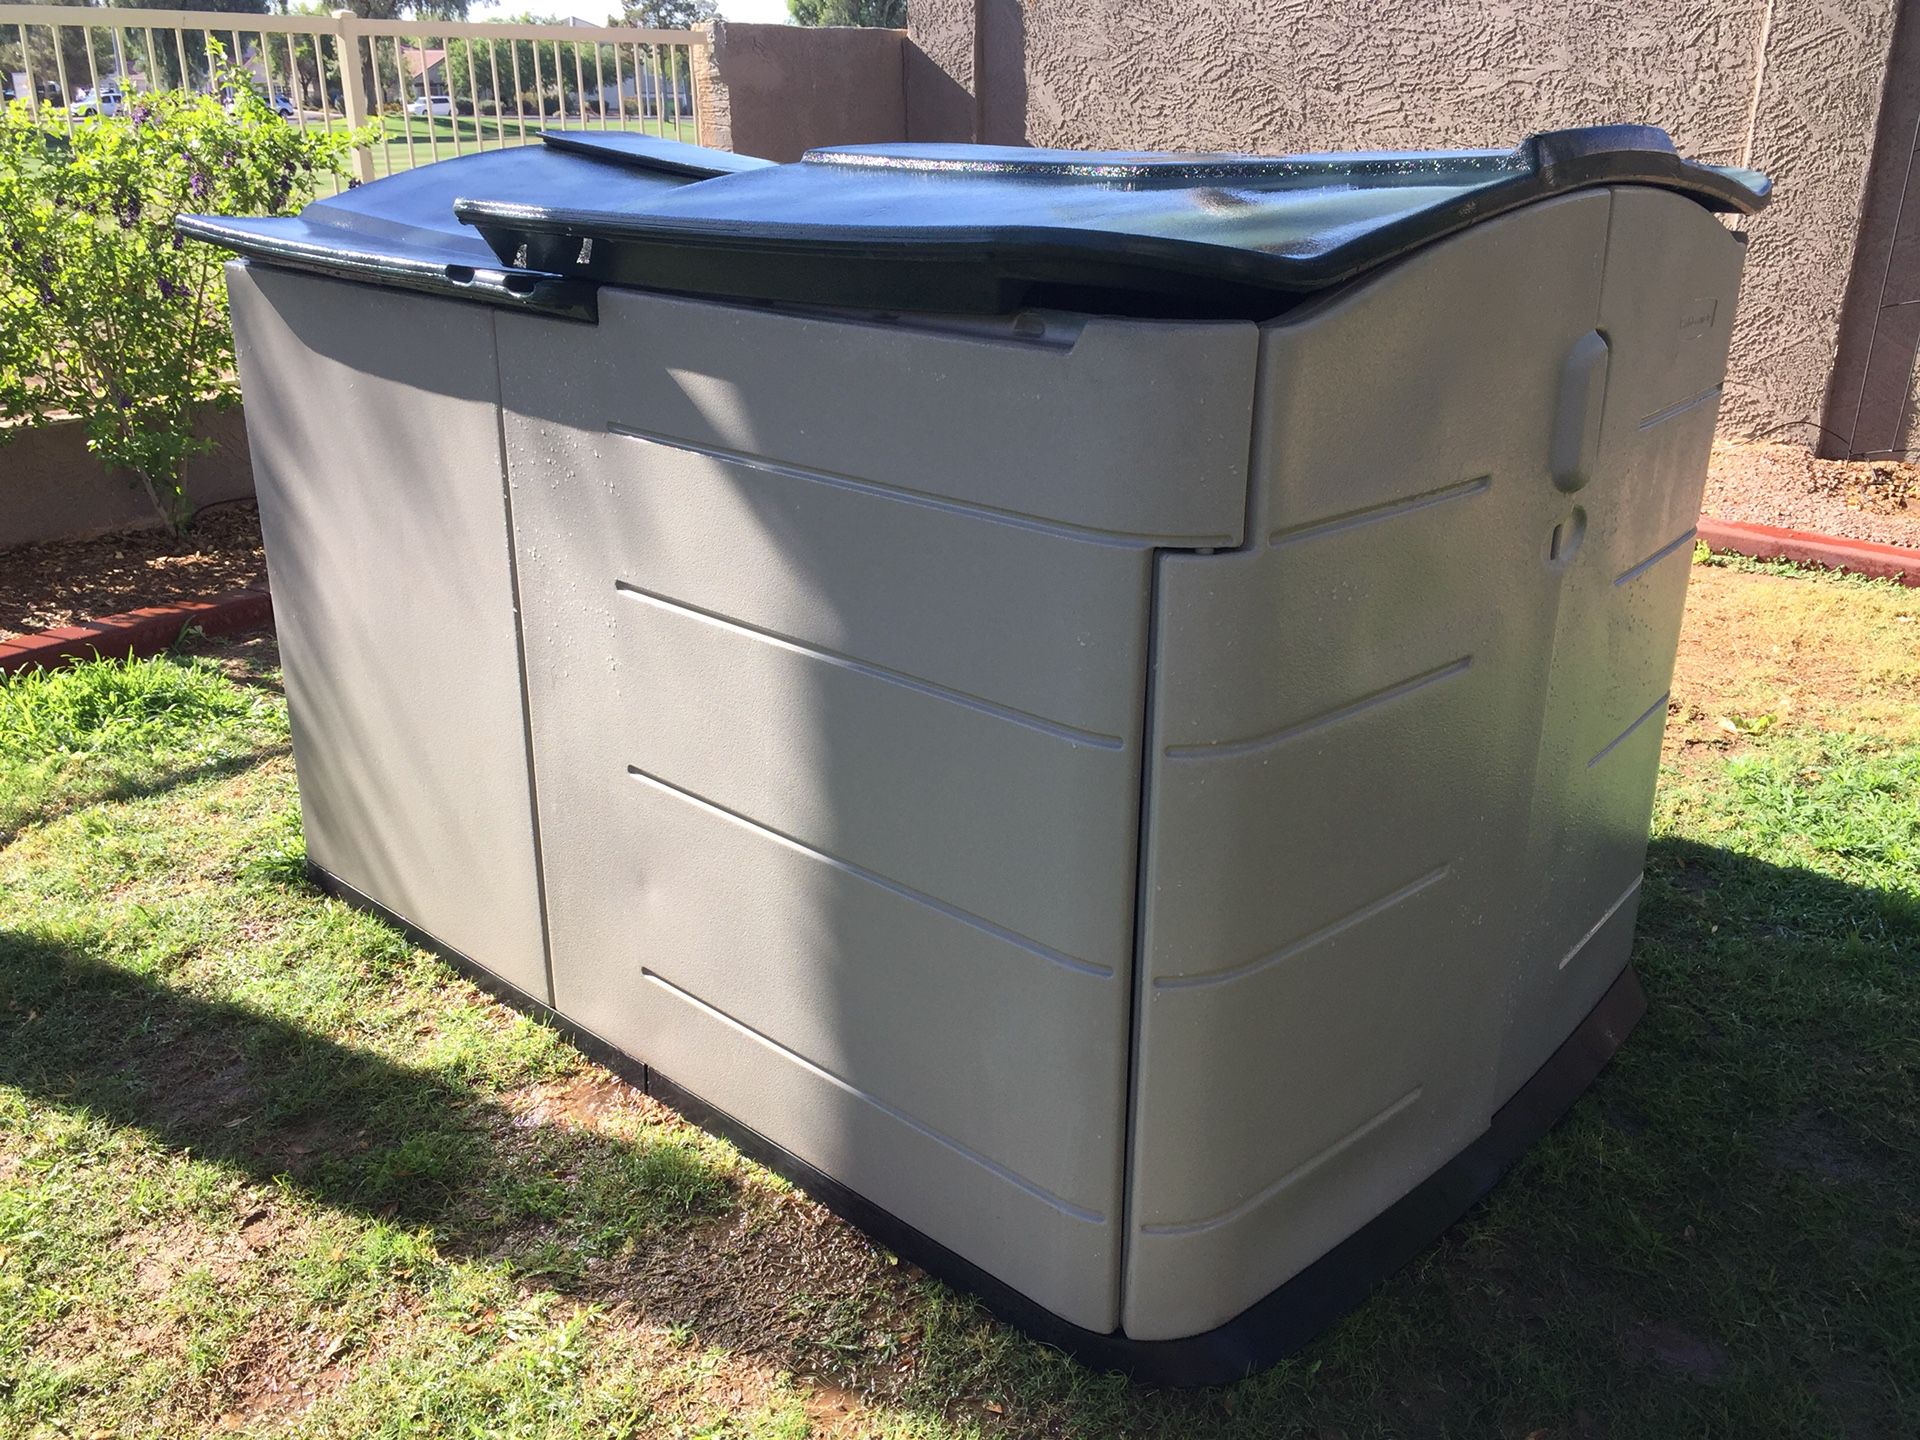 Rubbermaid Slide-Lid Storage Shed 3752, Green Roof, 92-cubic ft - CLEAN!